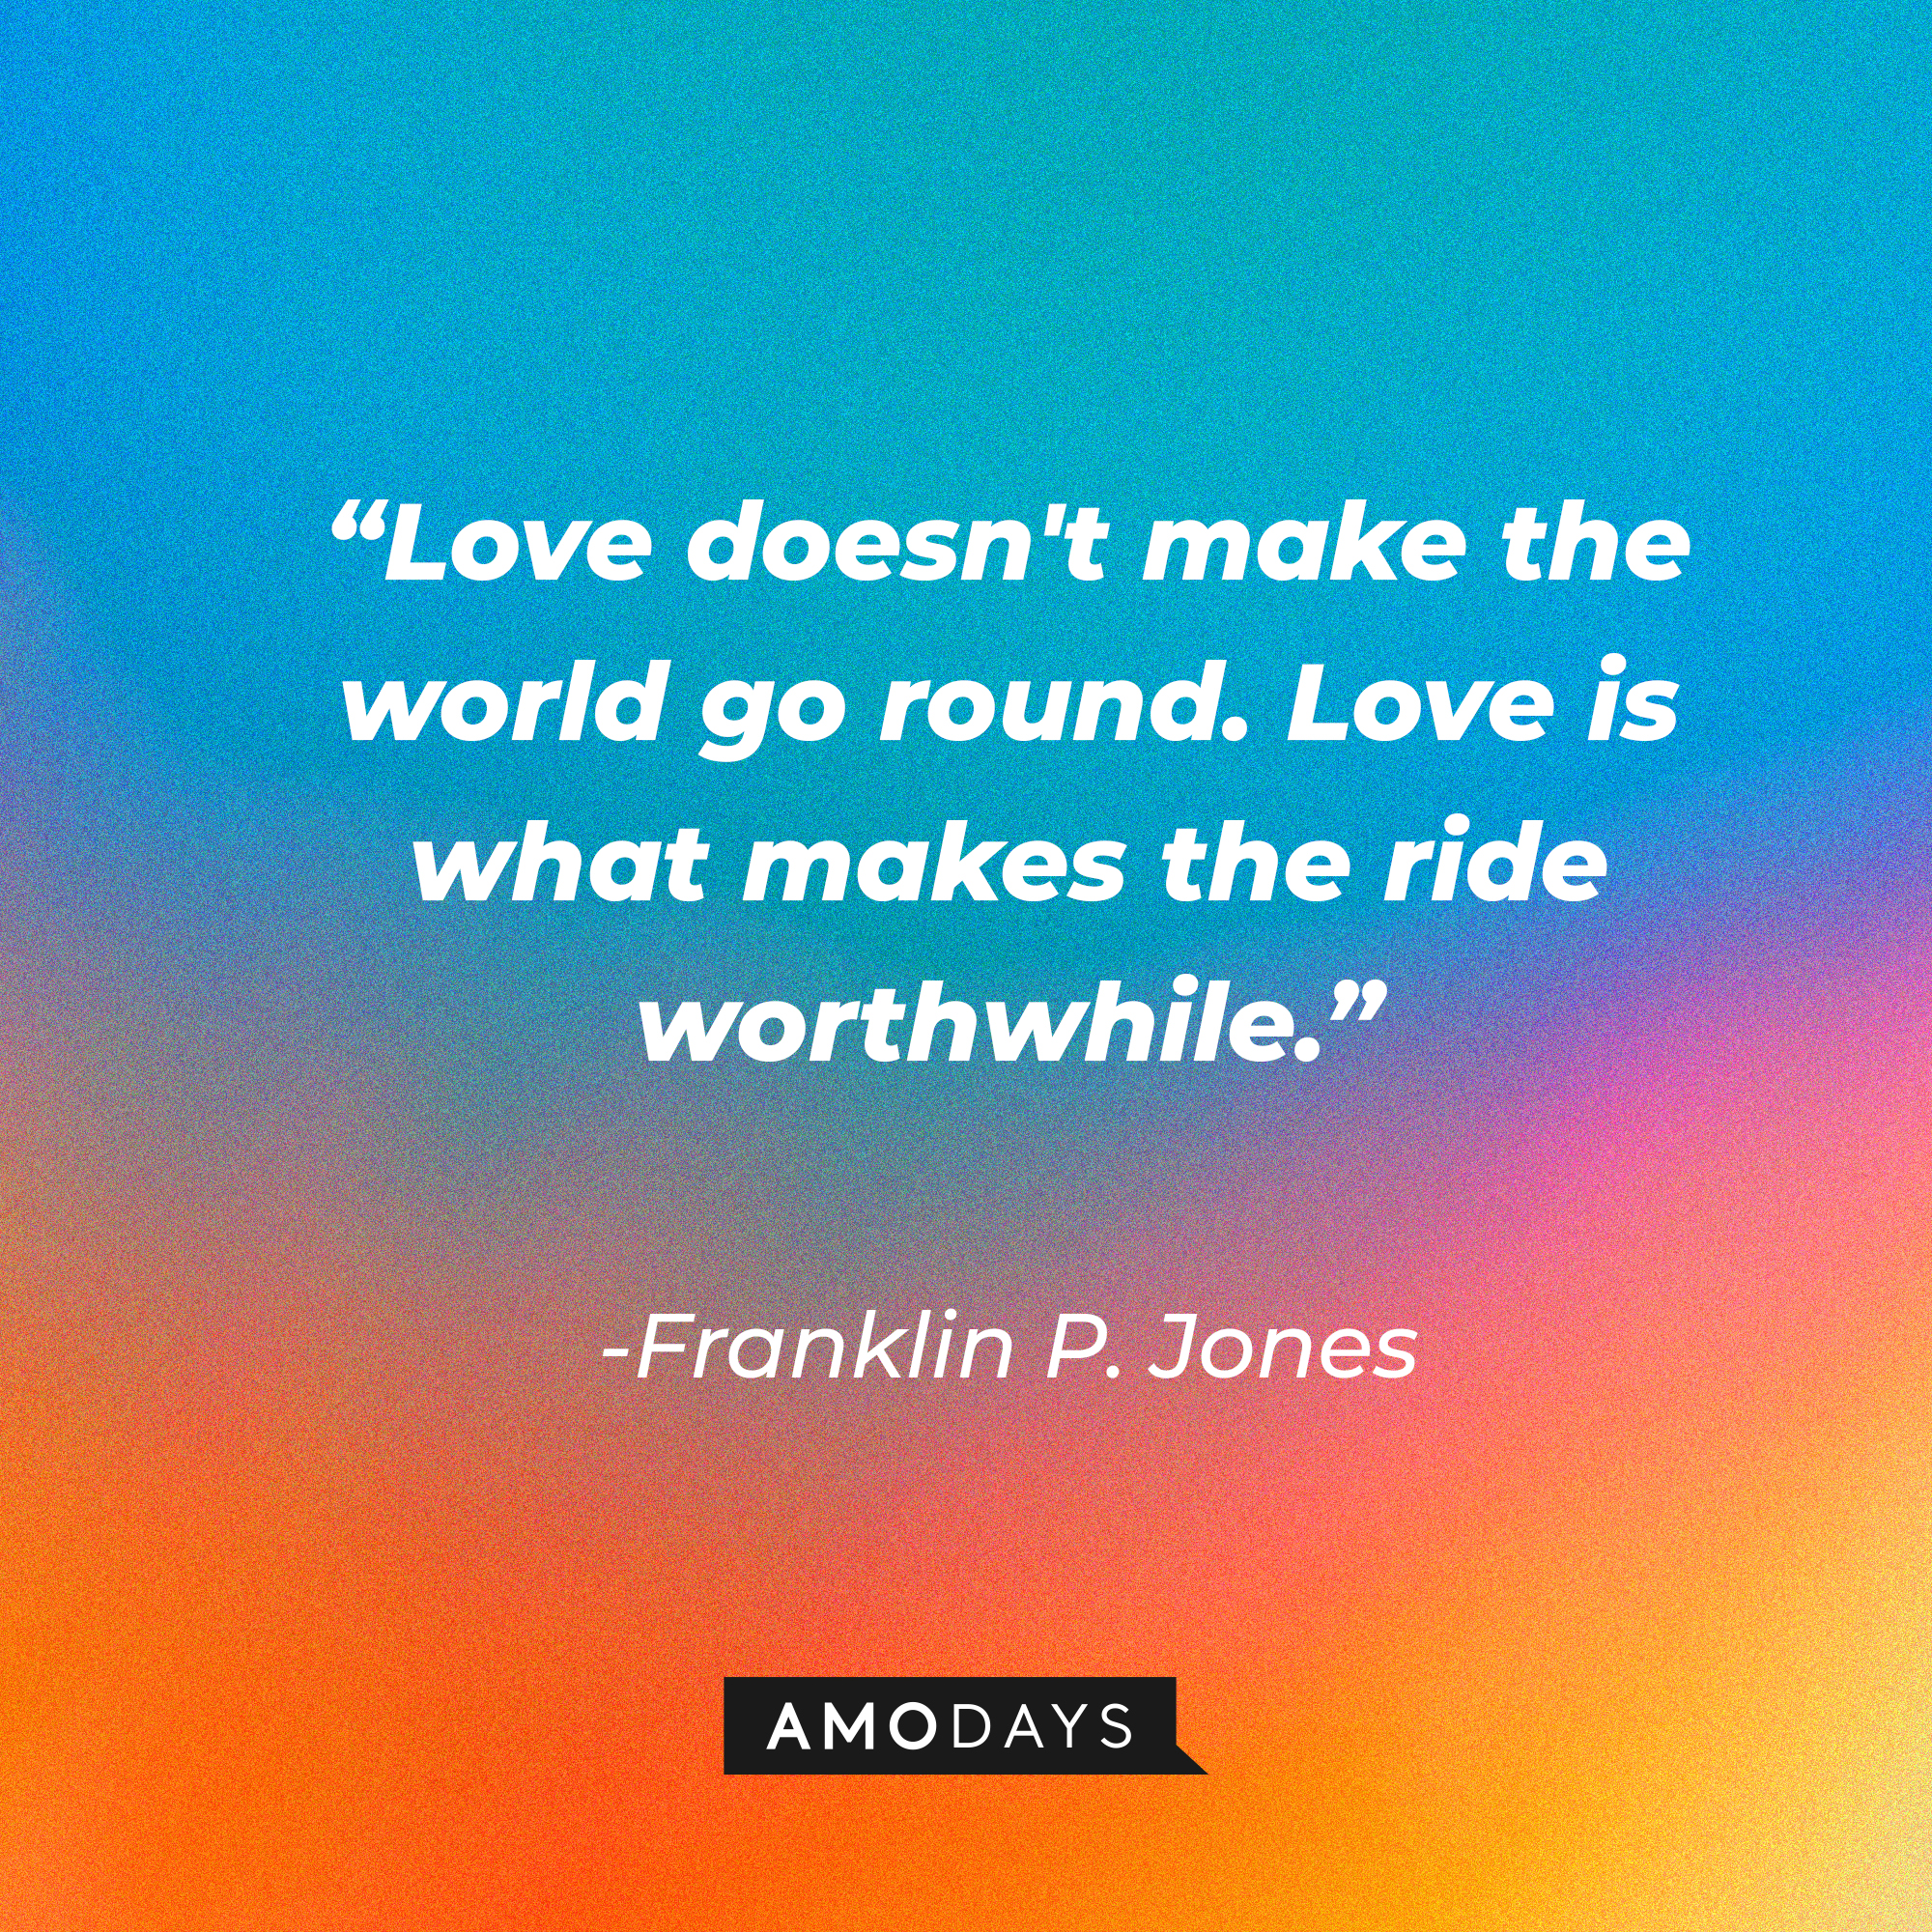 Franklin P. Jones' quote: “Love doesn't make the world go round. Love is what makes the ride worthwhile.” | Source: Amodays